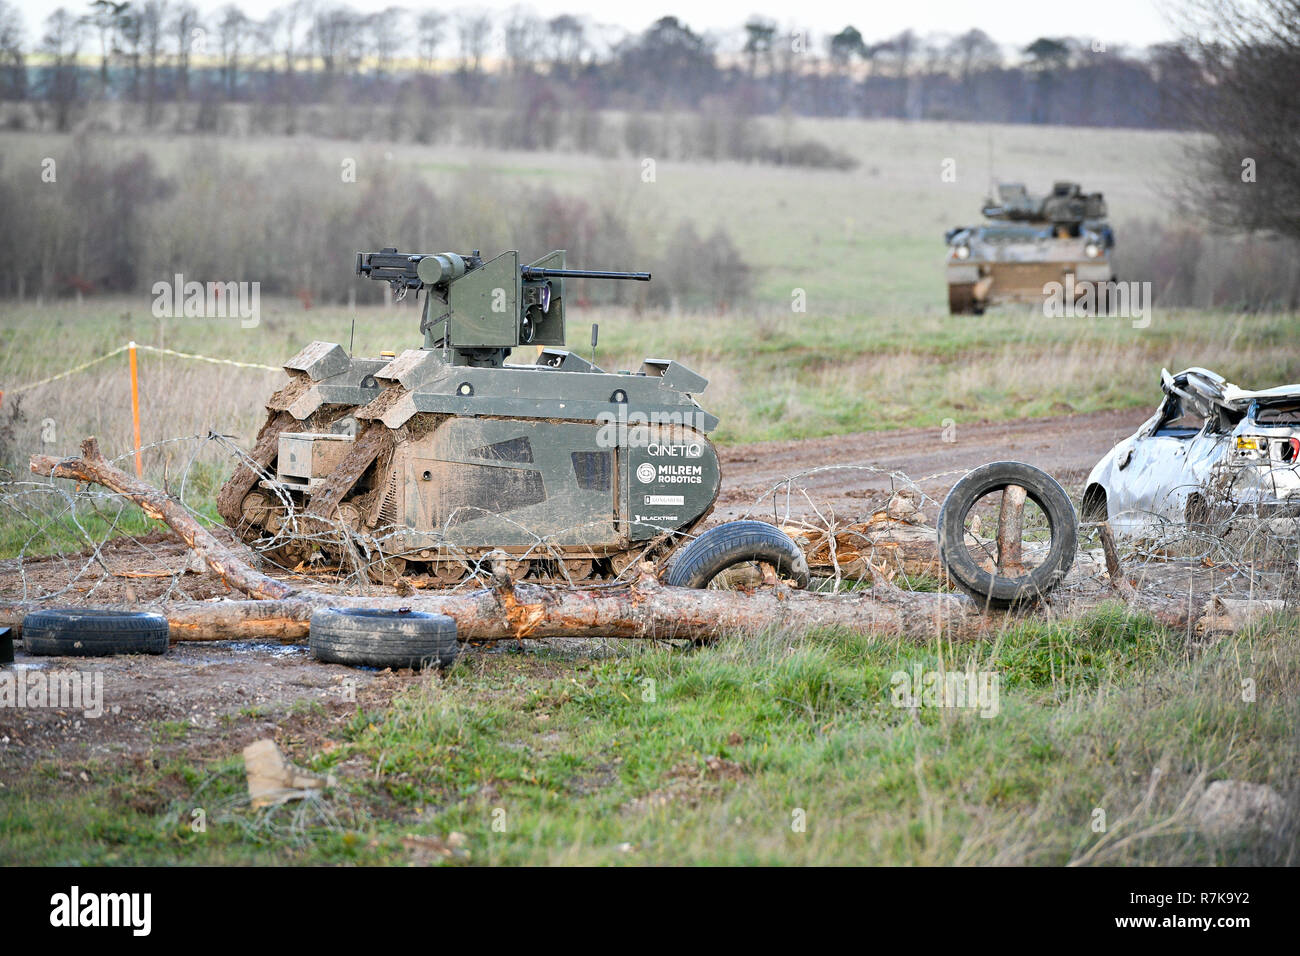 STANDALONE PHOTO A Titan Strike unmanned ground vehicle, equipped with a .50 Caliber machine gun, moves and secures ground on Salisbury Plain during exercise Autonomous Warrior 18, where military personnel, government departments and industry partners are taking part in Exercise Autonomous Warrior, working with NATO allies in a groundbreaking exercise to understand how the military can exploit technology in robotic and autonomous situations. Stock Photo